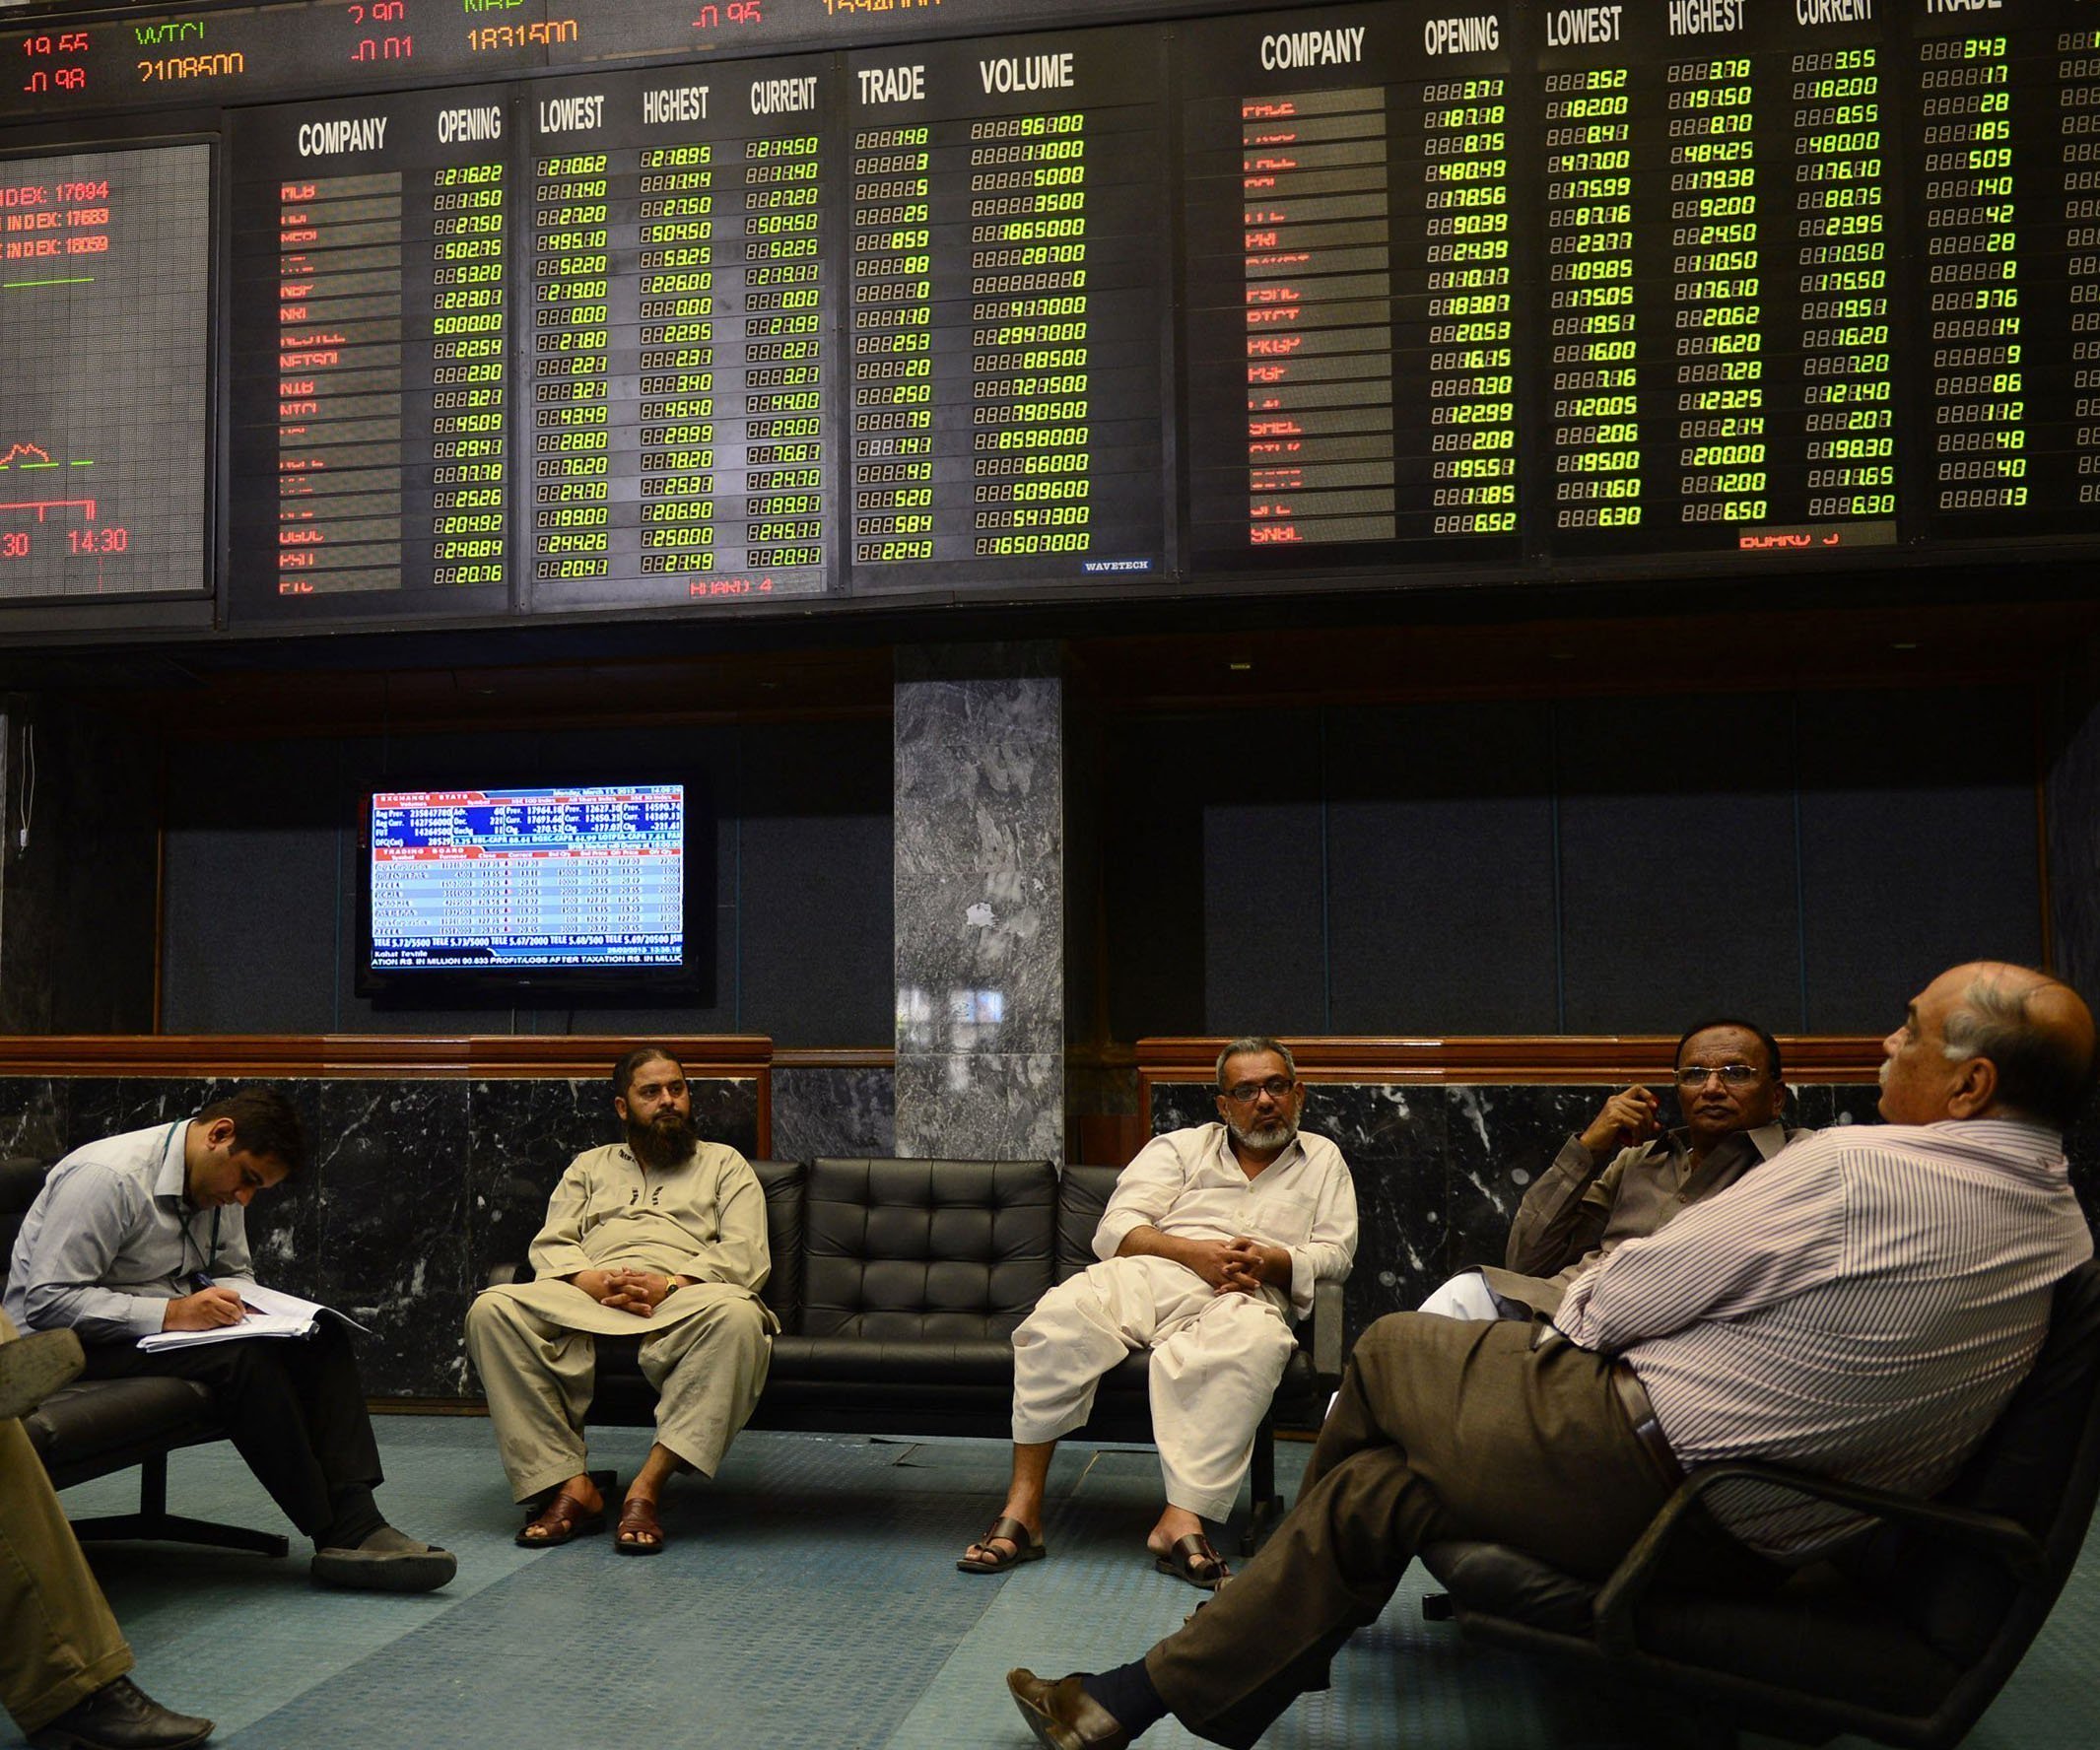 benchmark index increases 4 80 points to settle at 41 903 50 photo express